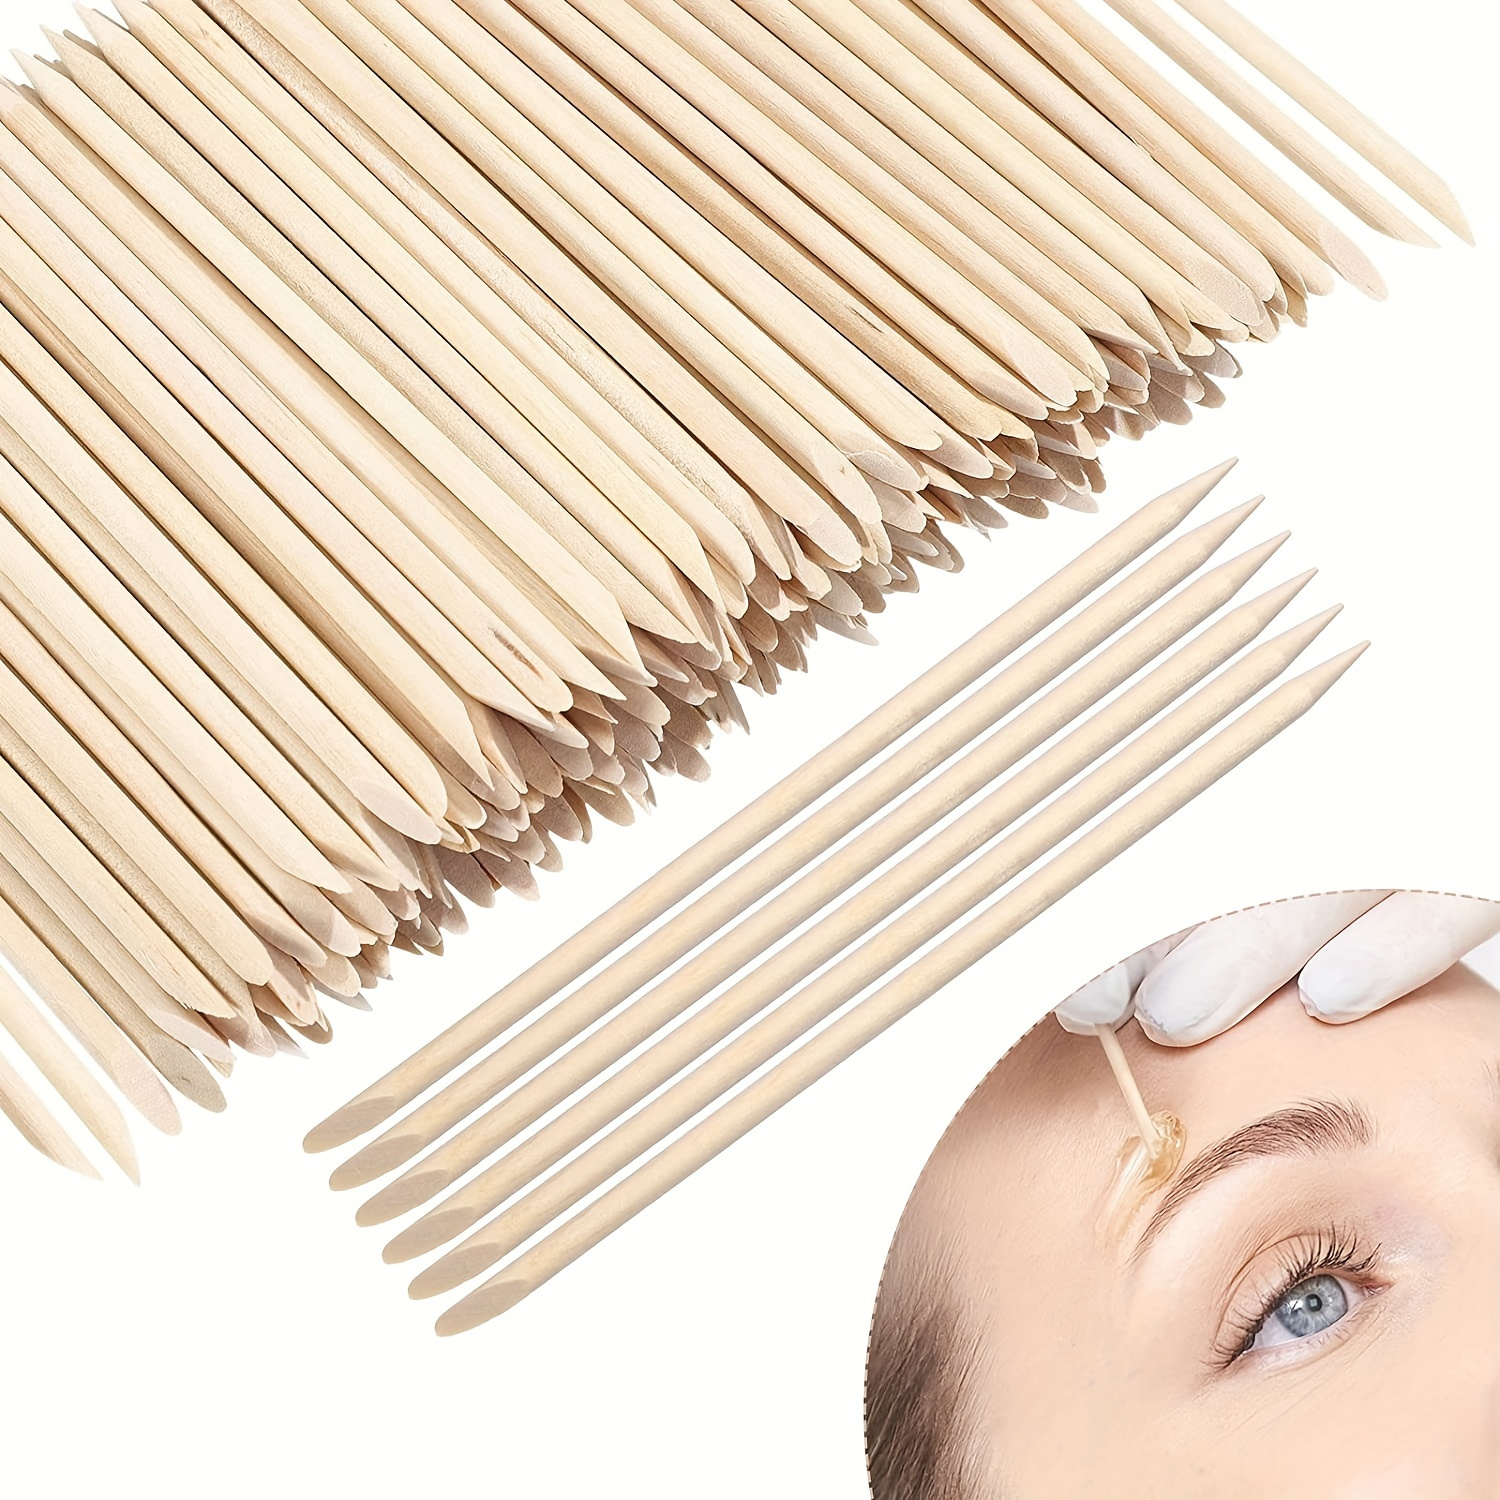 60 Pcs Wax Sticks, Nose Wax Kit Accessories, Waxing Sticks for Nose Hair  Remover, Wax Applicator Sticks for Nostril Nasal Cleaning Ear Face Eyebrows